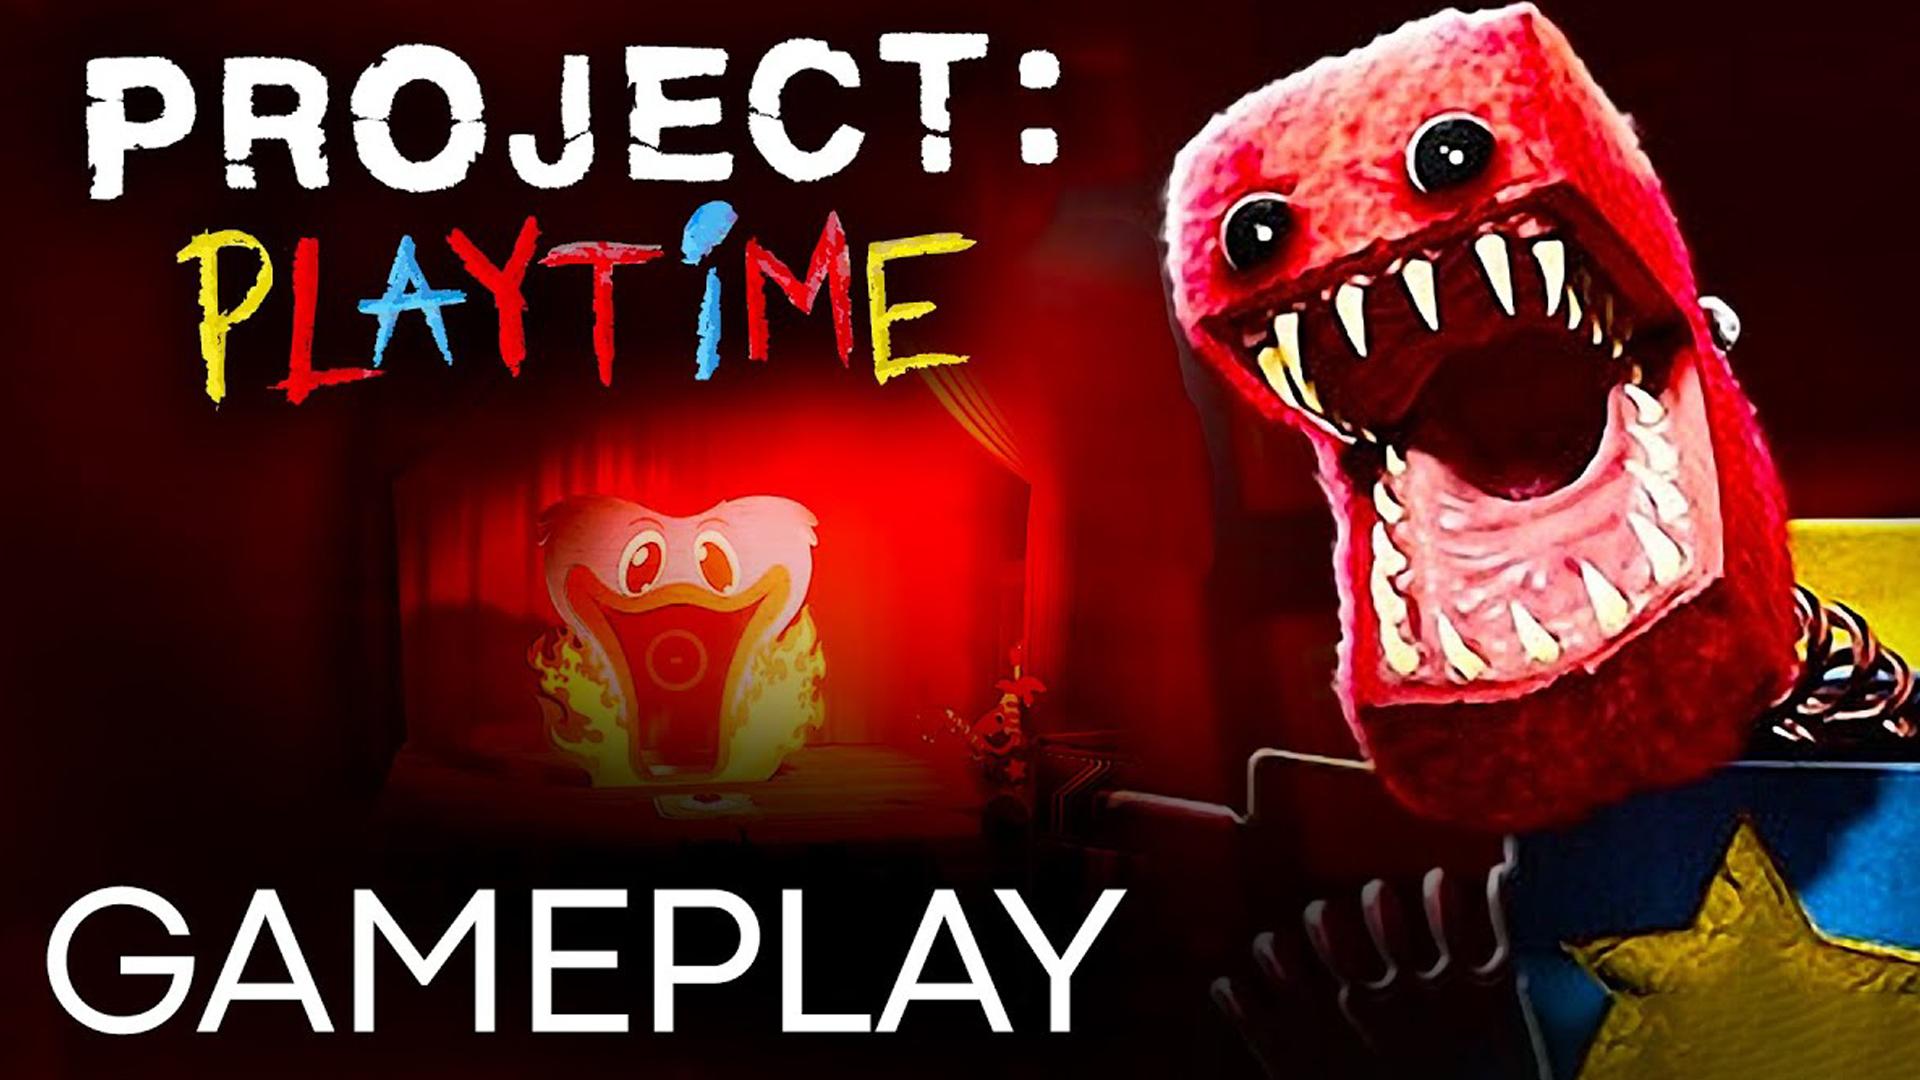 Project playtime game. Проджект Плейтайм. Poppy Playtime Project. Poppy Playtime Project Playtime. Project Poppy Play time.